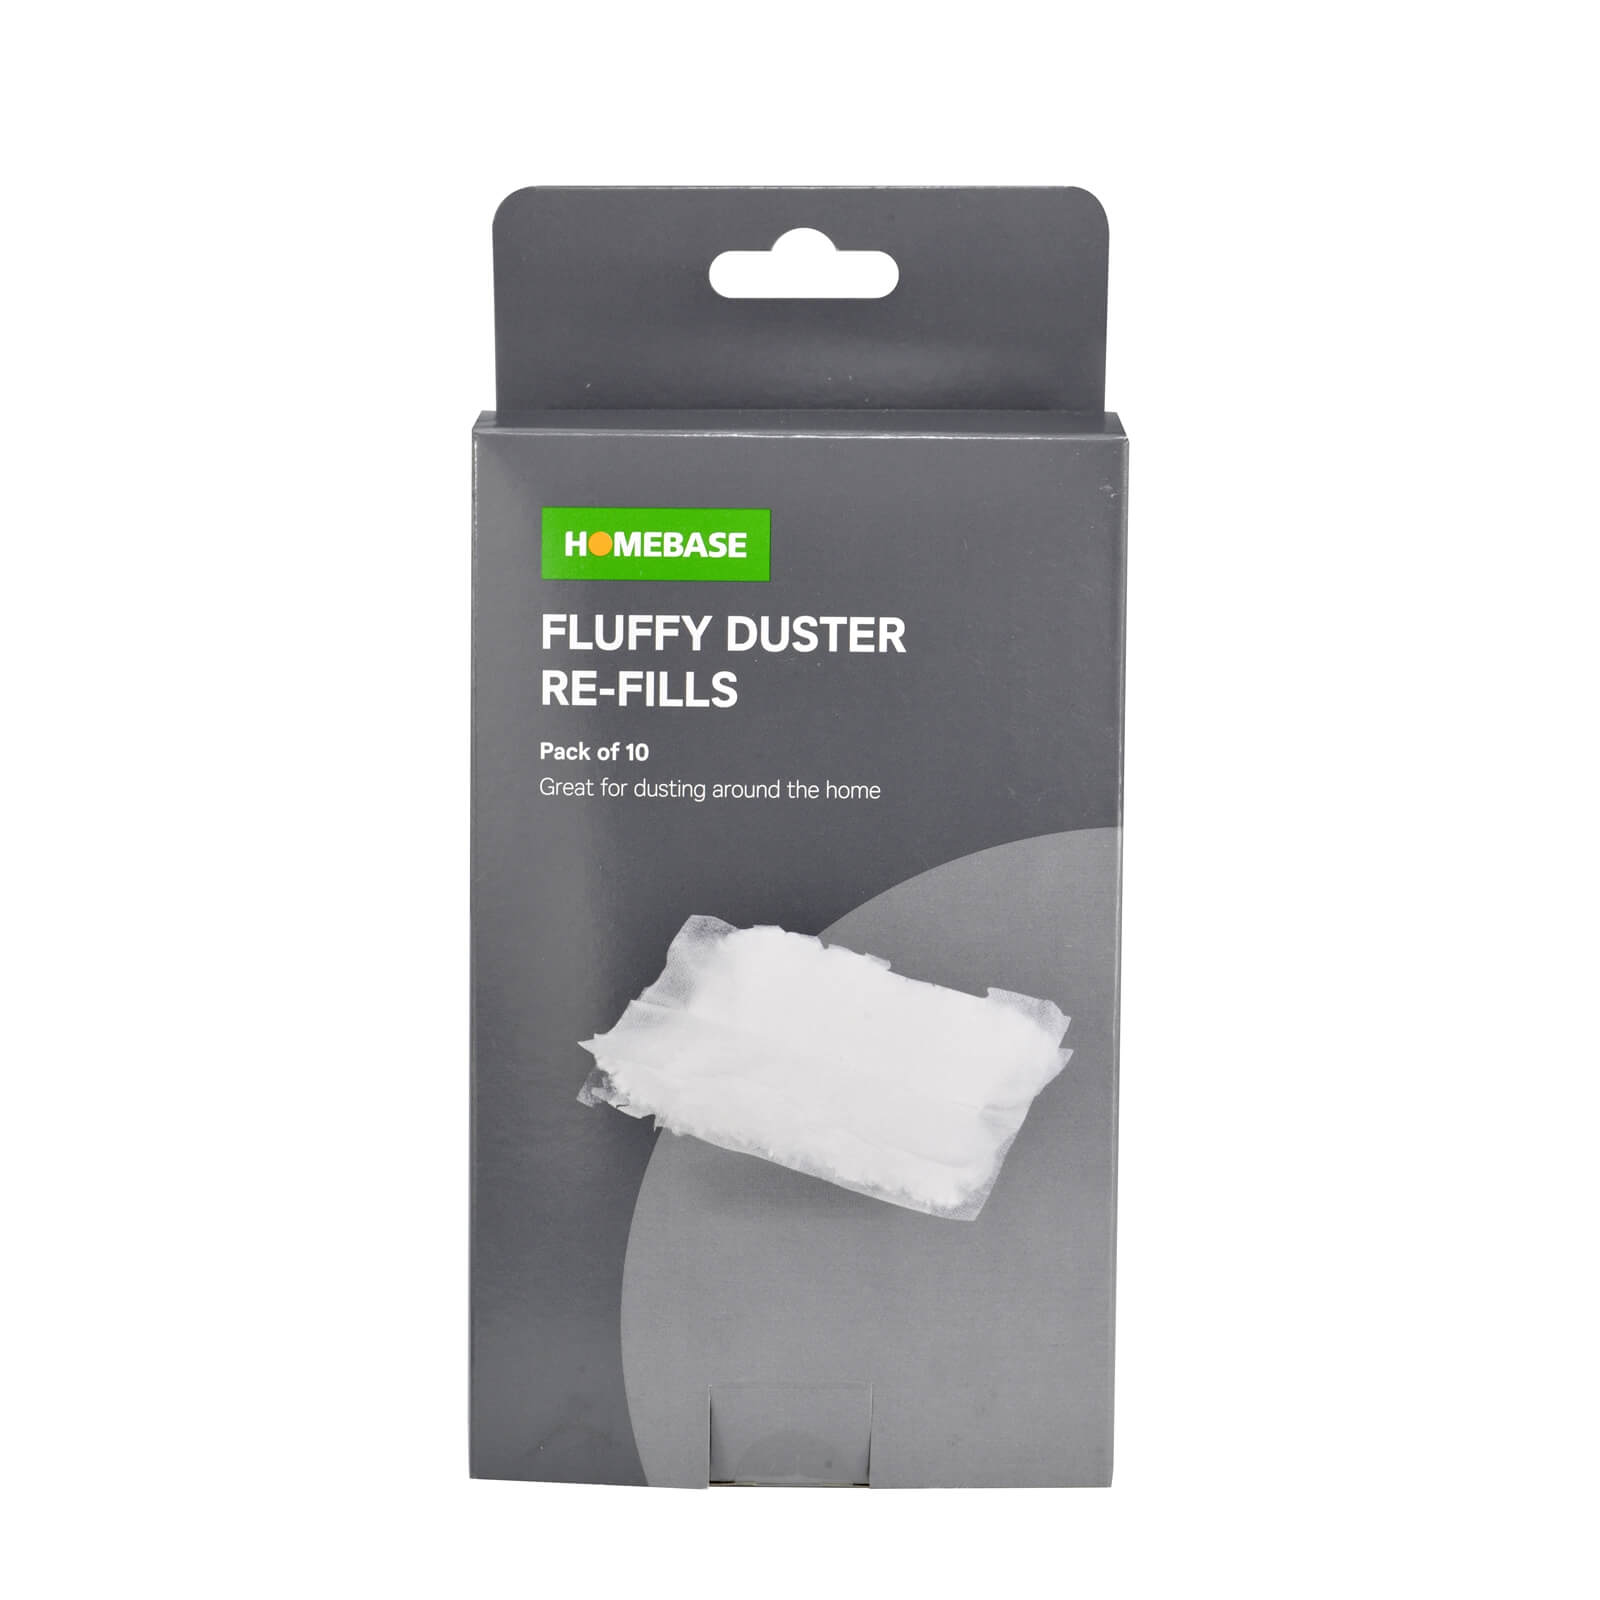 10 pack of Fluffy Duster Re-fills